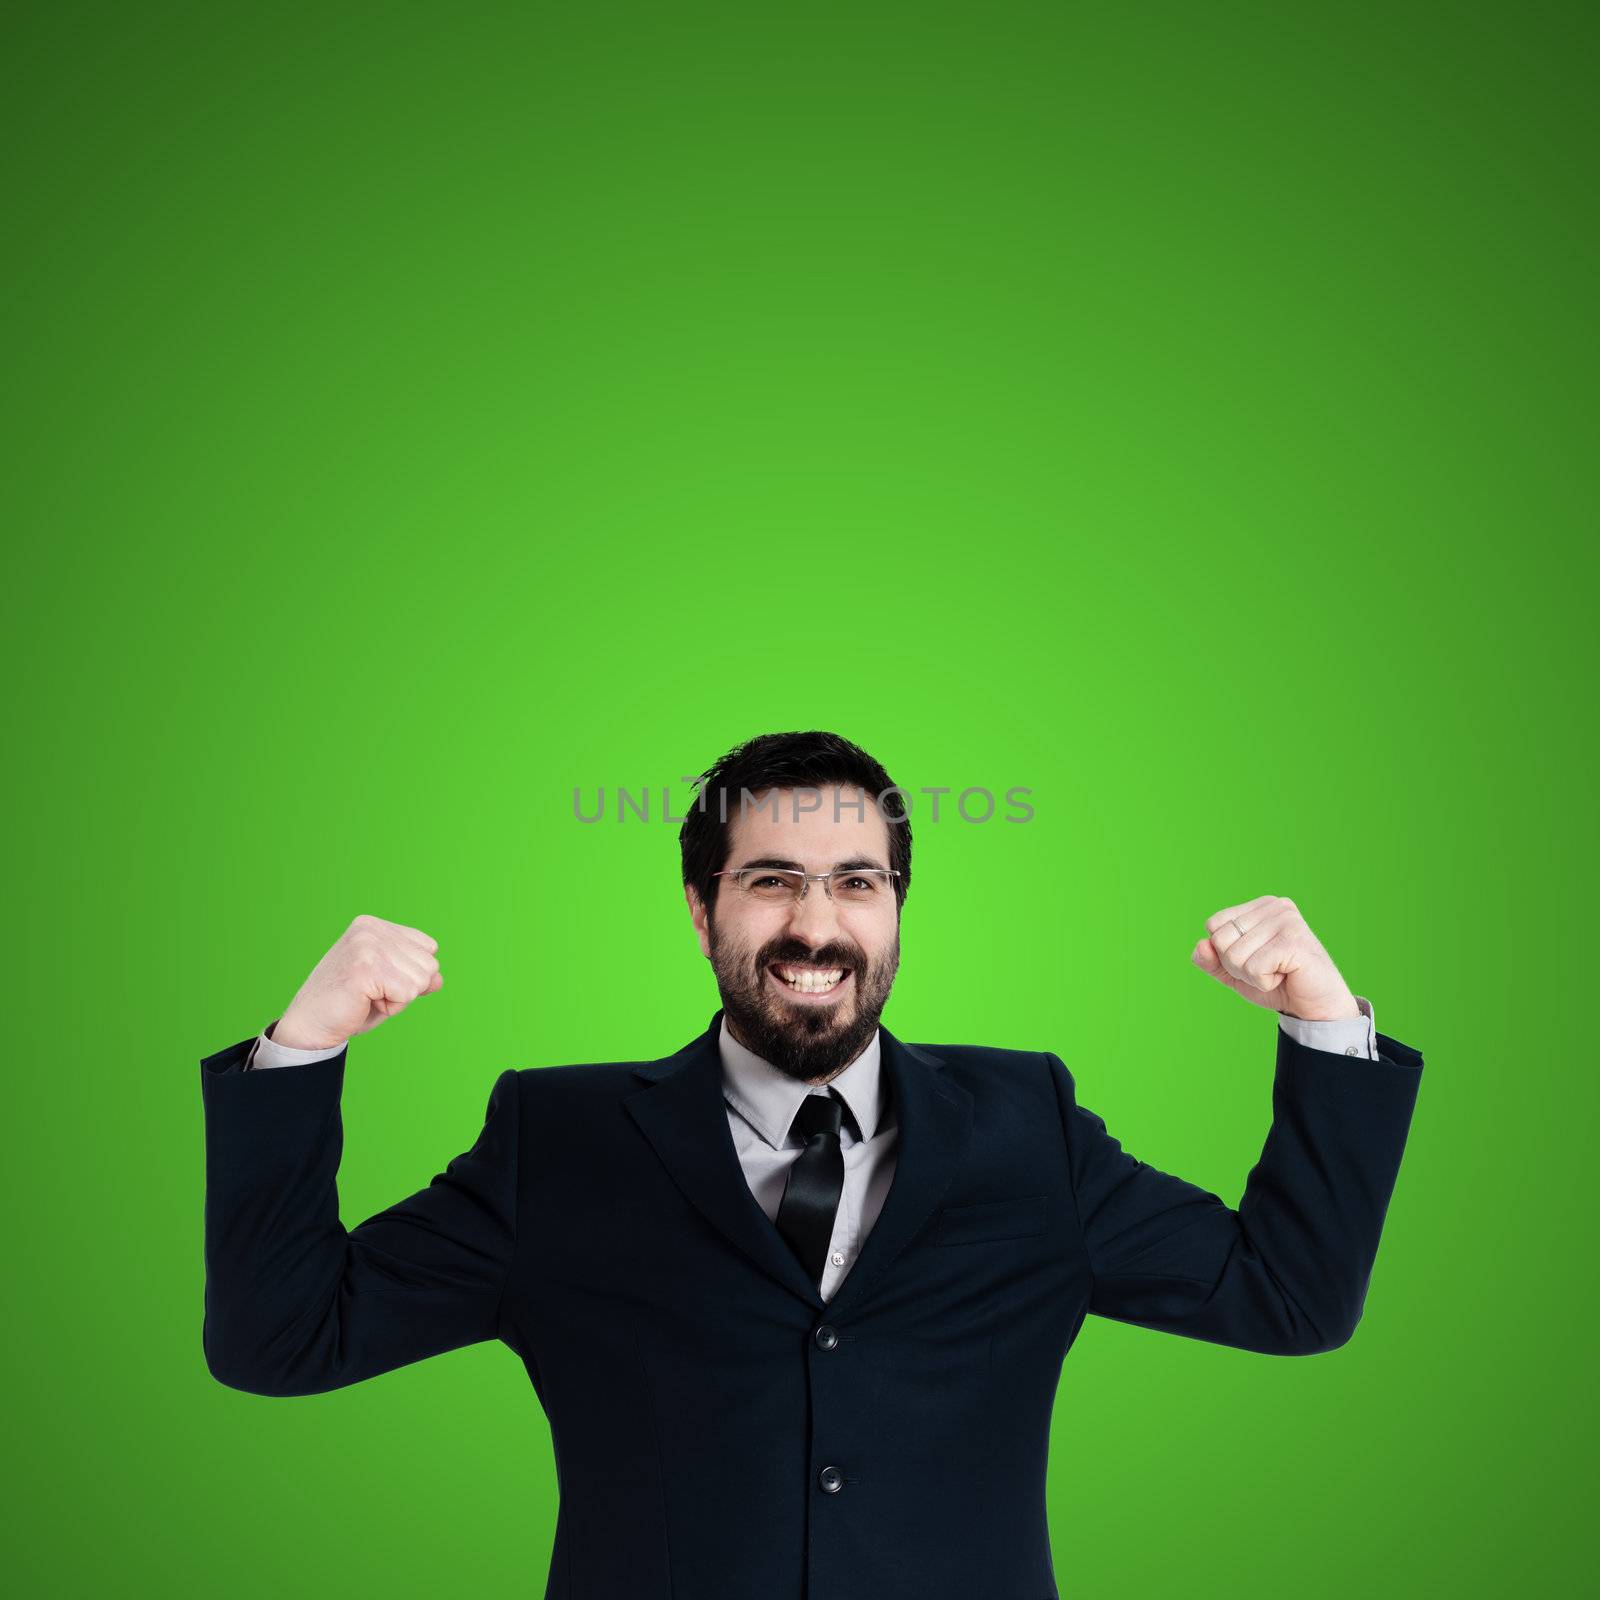 strong business man flexing muscle on green background